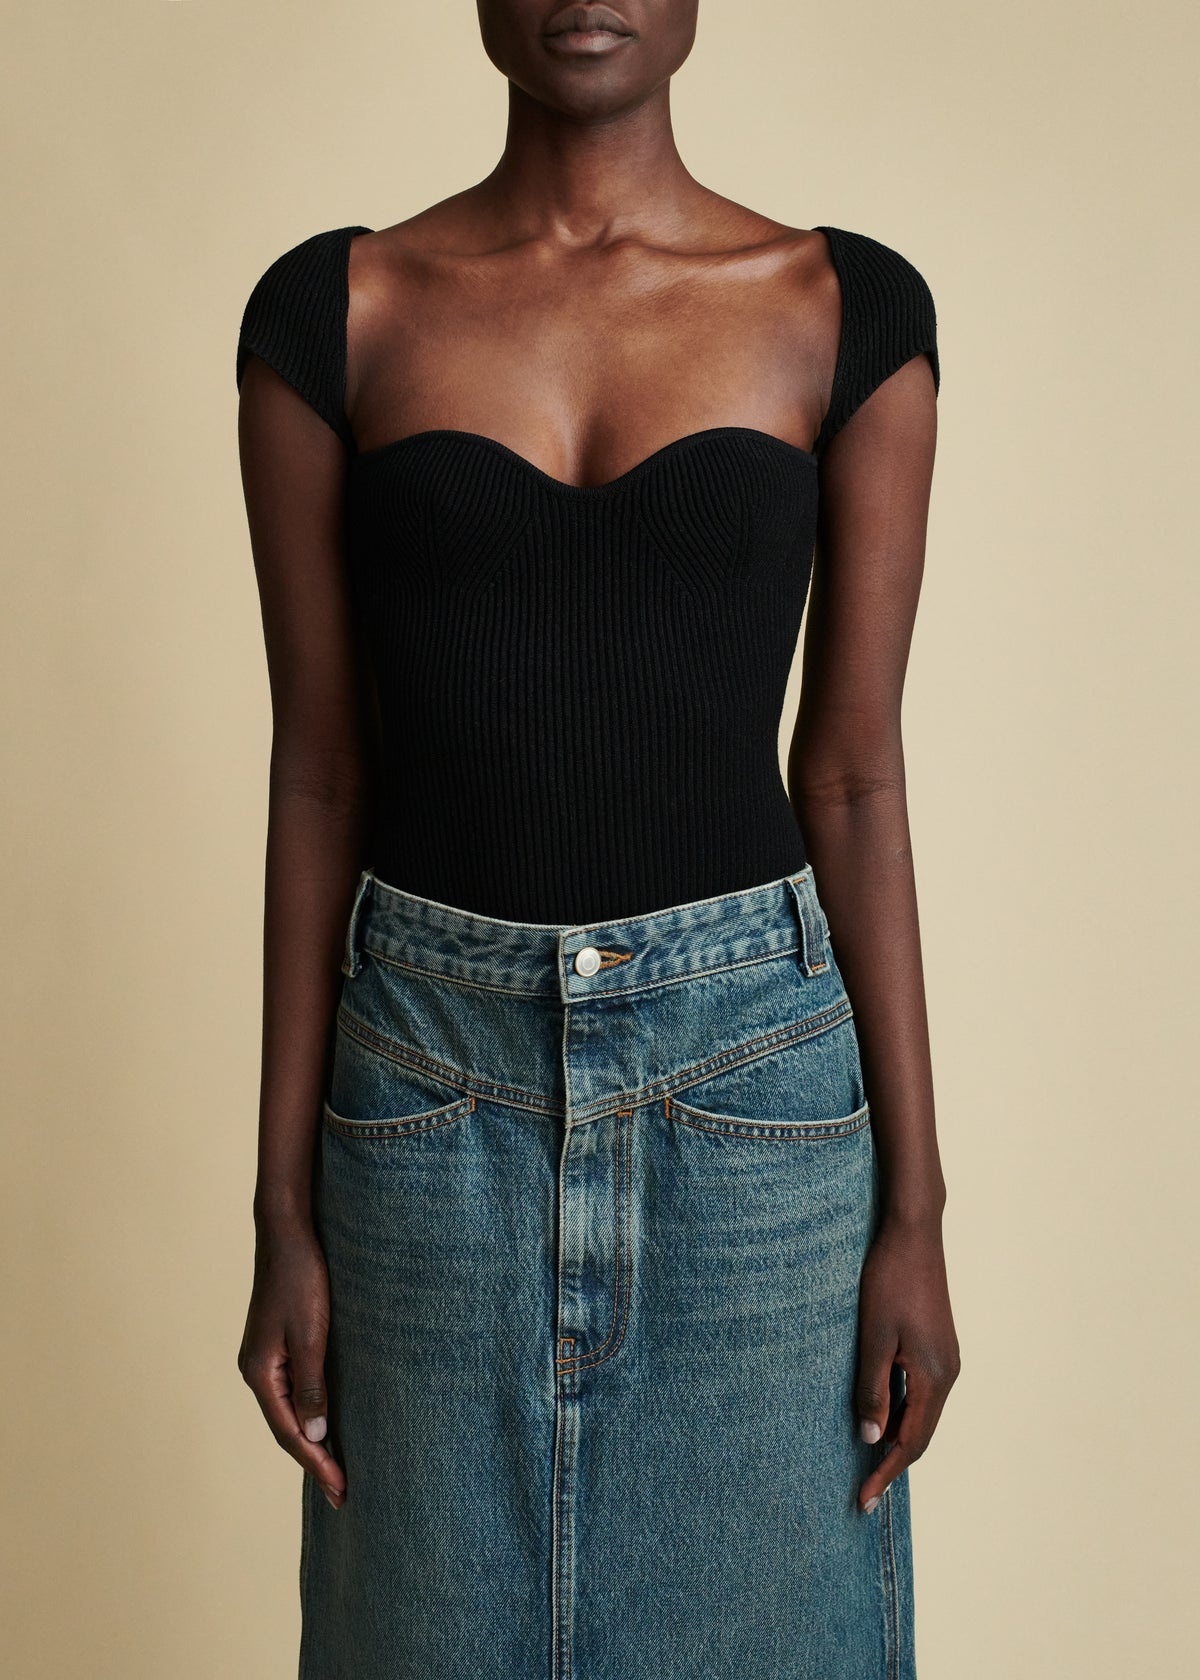 The Ista Top in Black - 1